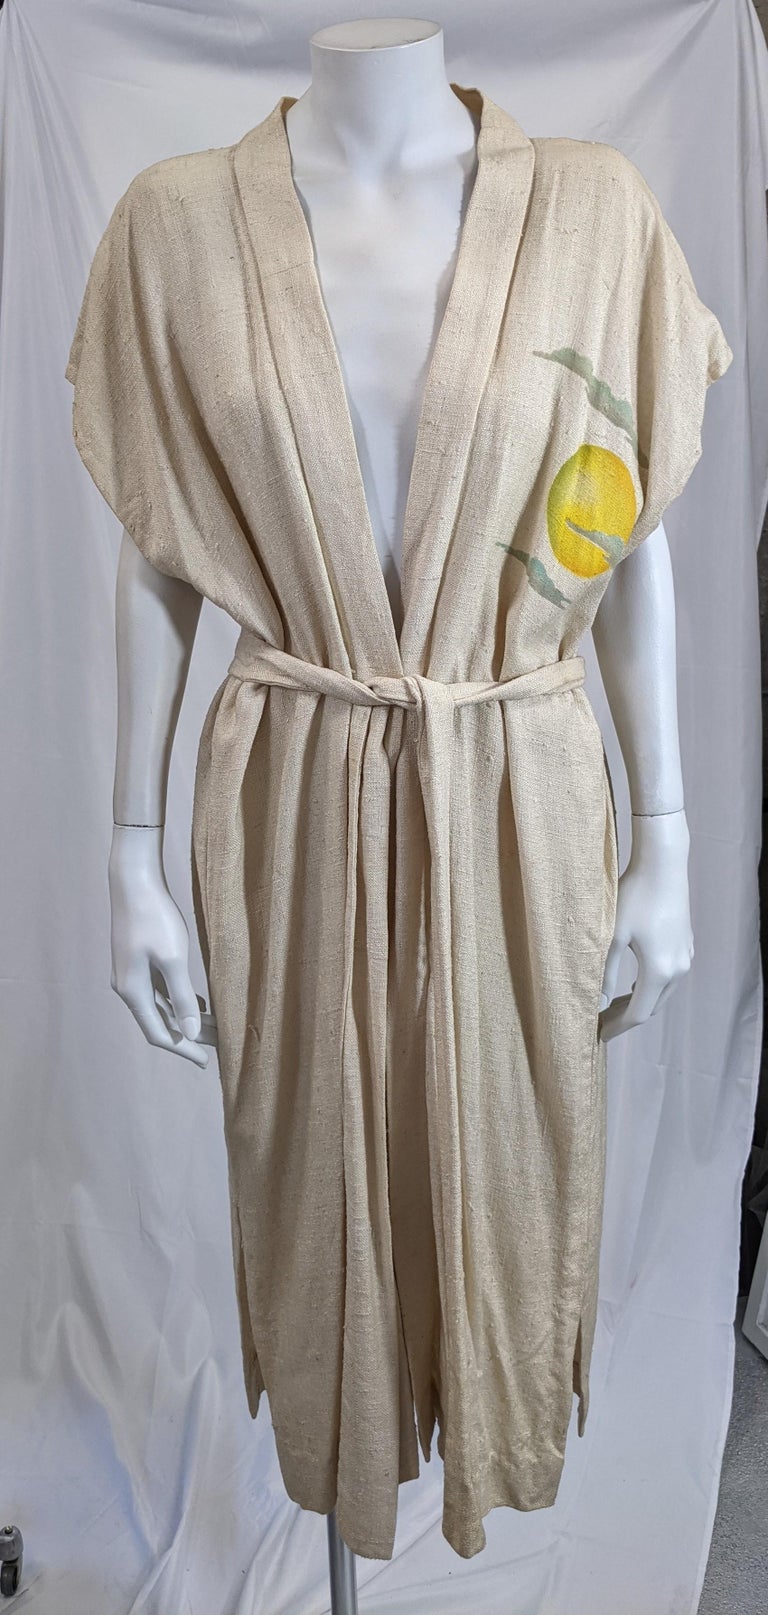 Striking and unusual Art Deco lounging robe of simple rectangular shape with self belt, in raw silk tussah. The garments' back is stenciled and air brushed with a Deco Modernist figure of a female warrior against a full moon. The front has a motif